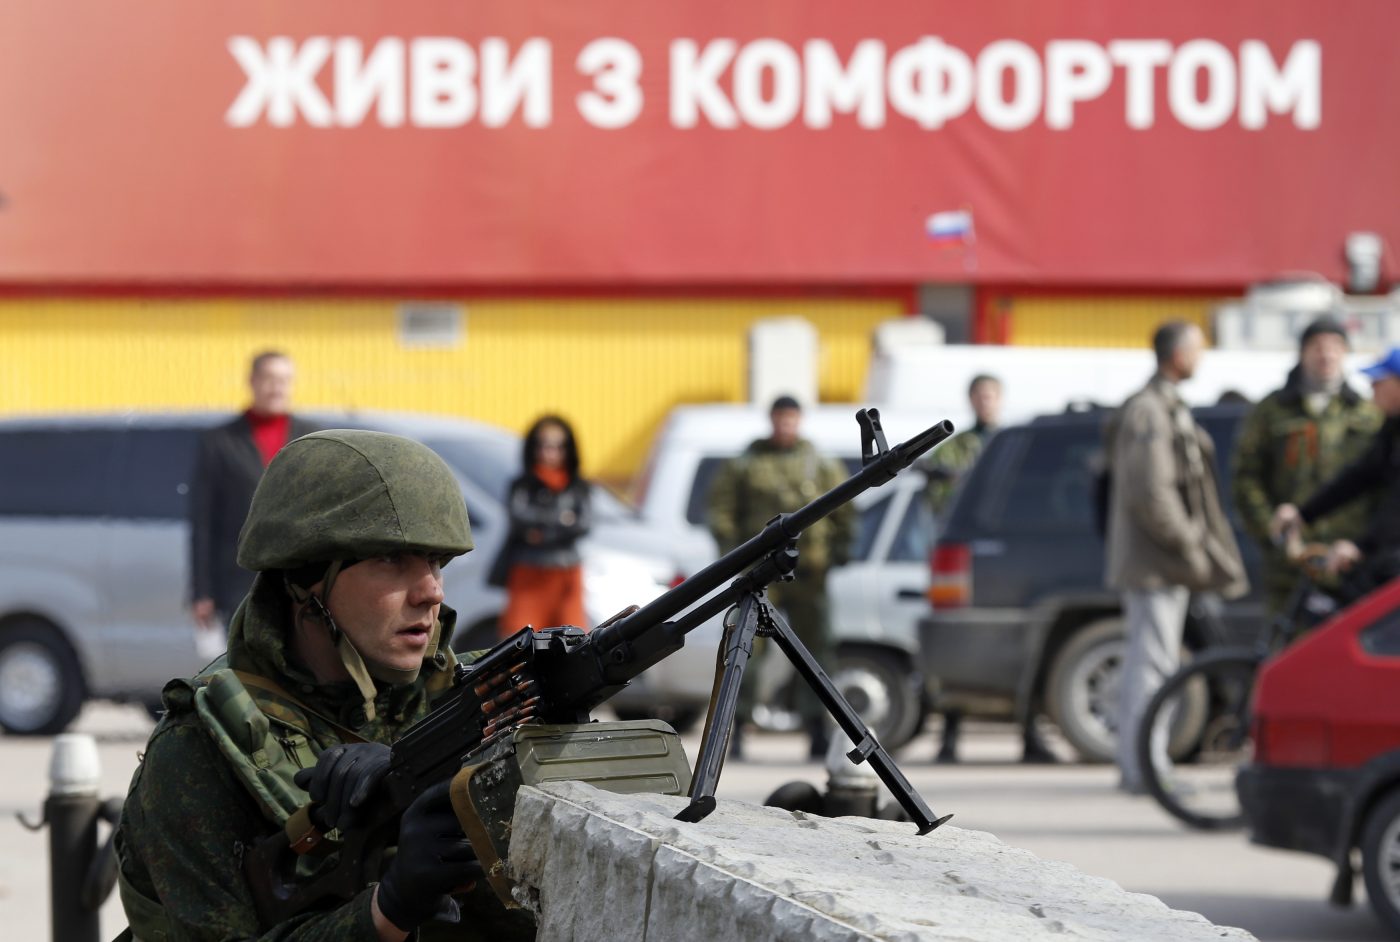 Photo: An armed man, believed to be a Russian serviceman, guards near the naval headquarters in Sevastopol, March 19, 2014. Around a dozen Ukrainian servicemen, unarmed and in civilian clothes, walked out of the Ukrainian naval headquarters in the Crimean port of Sevastopol on Wednesday after it was taken over by pro-Russian forces, a Reuters witness said. The words in the background read,"Live with comfort". Credit: REUTERS/Vasily Fedosenko